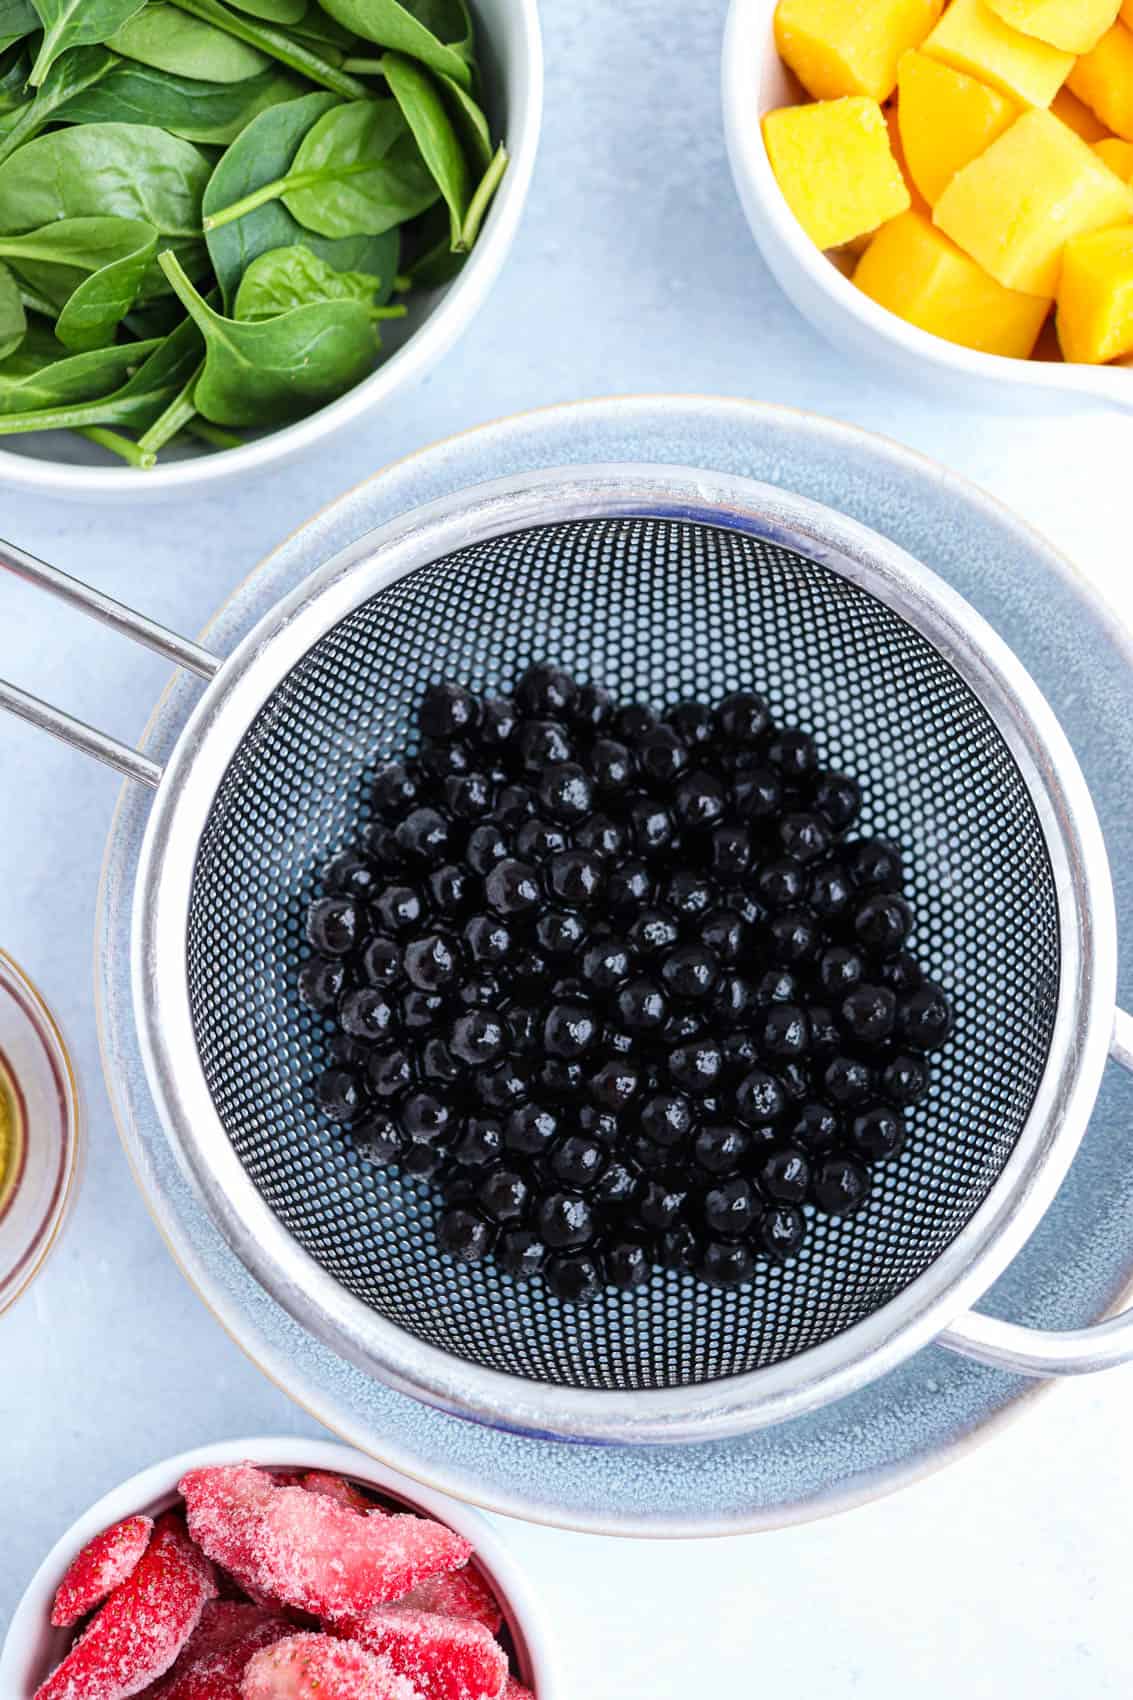 black boba pearls in a sieve.